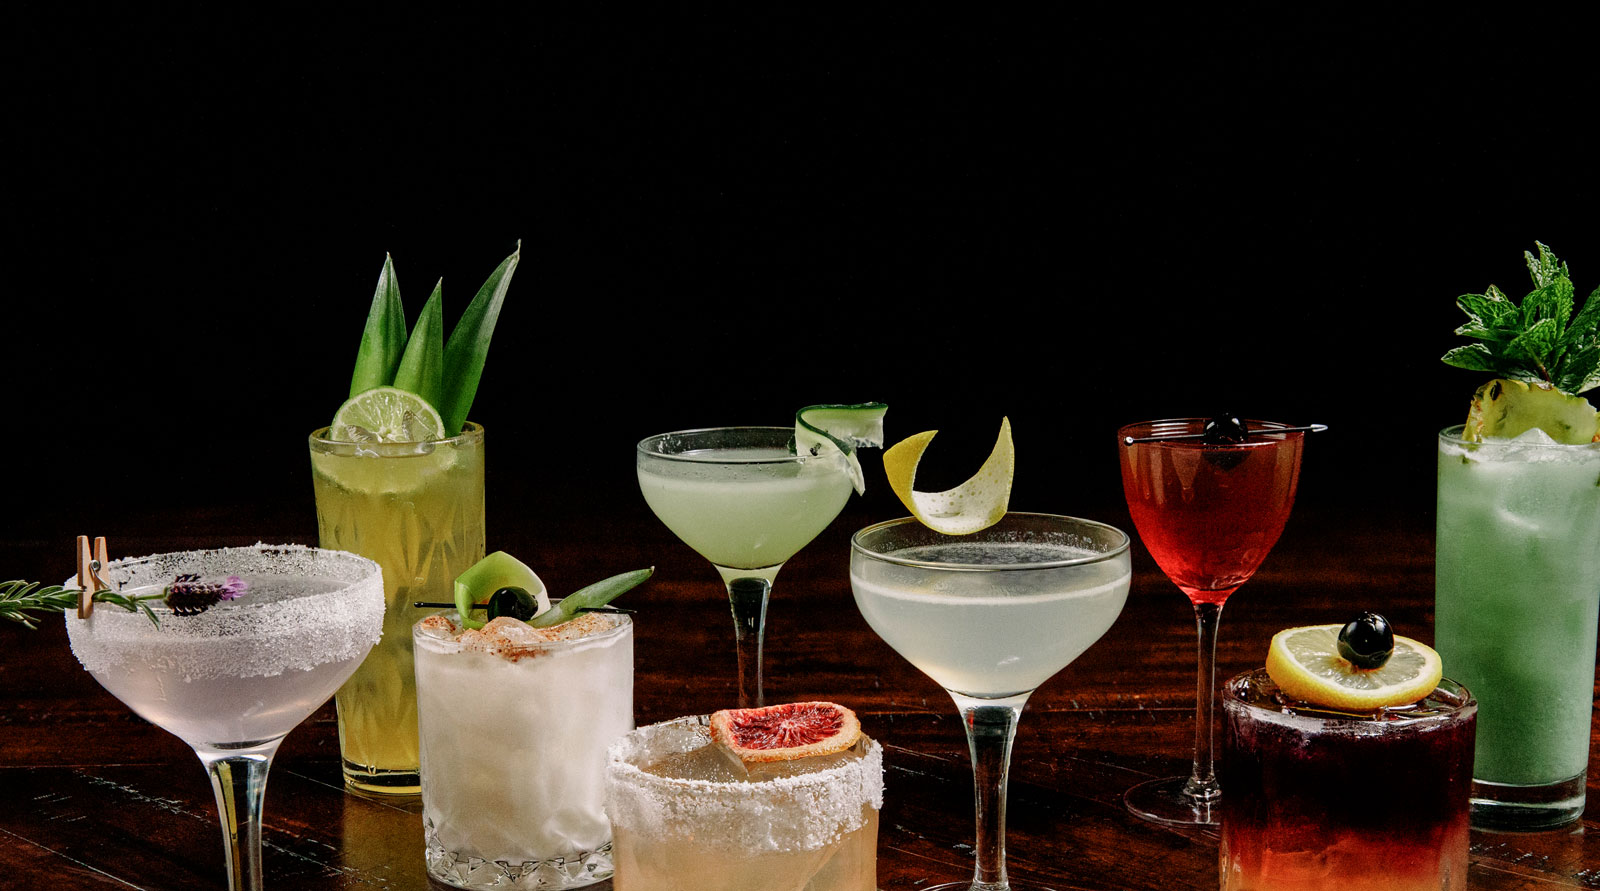 Pictured: an array of seasonal cocktails including margaritas, mojitos, mules, and more. Some of the drinks feature sugared rims. Other garnishes include sprigs of lavender, slices of lime and blood orange, delicate curls of citrus peel, and fresh mint.